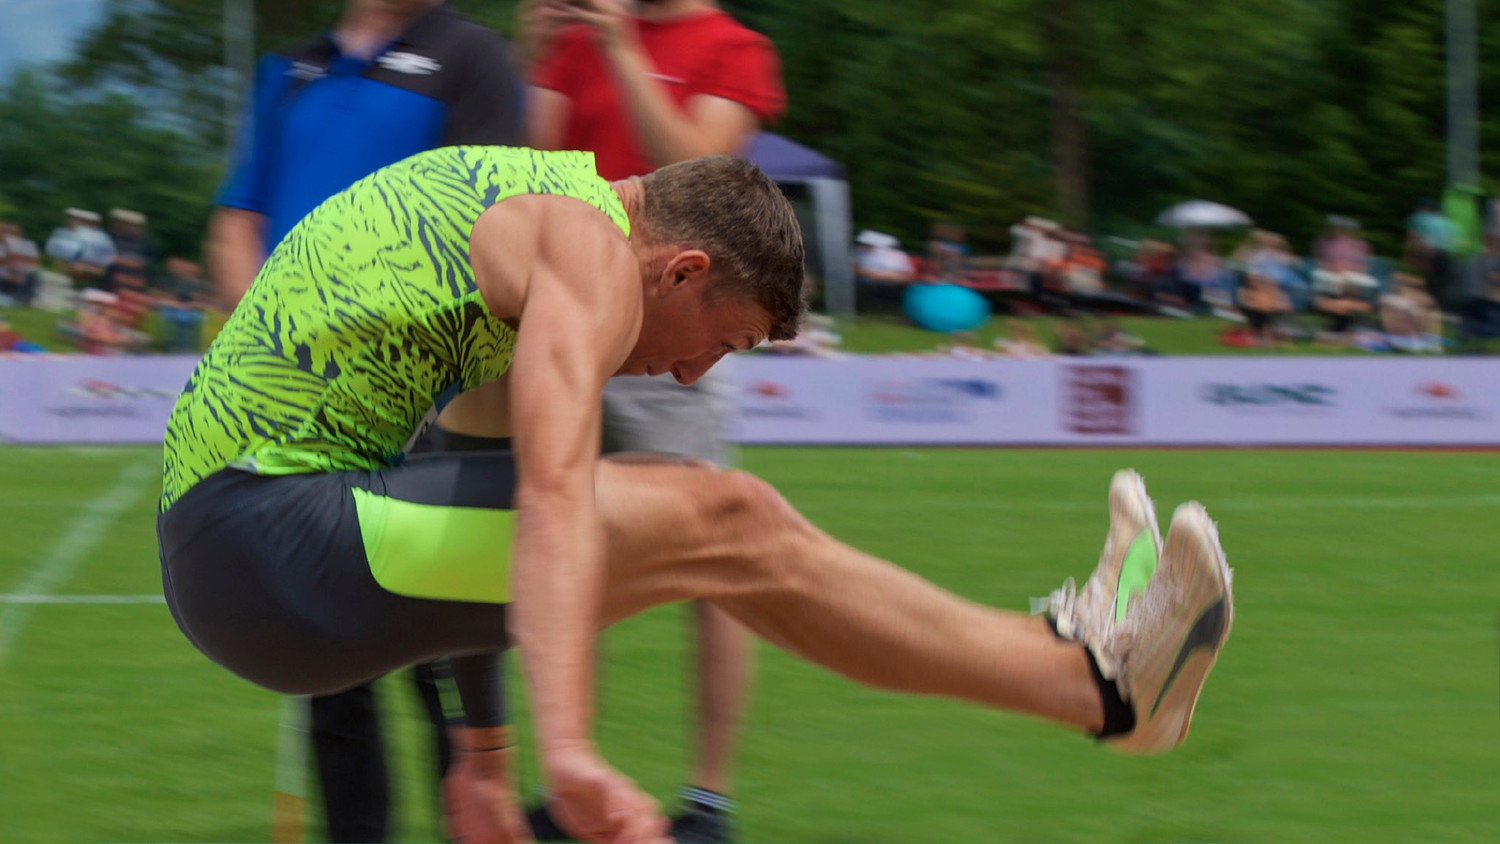  With 8.45 meters, Simon Ehammer from Switzerland set a long jump world record within a decathlon in Götzis 2022. 